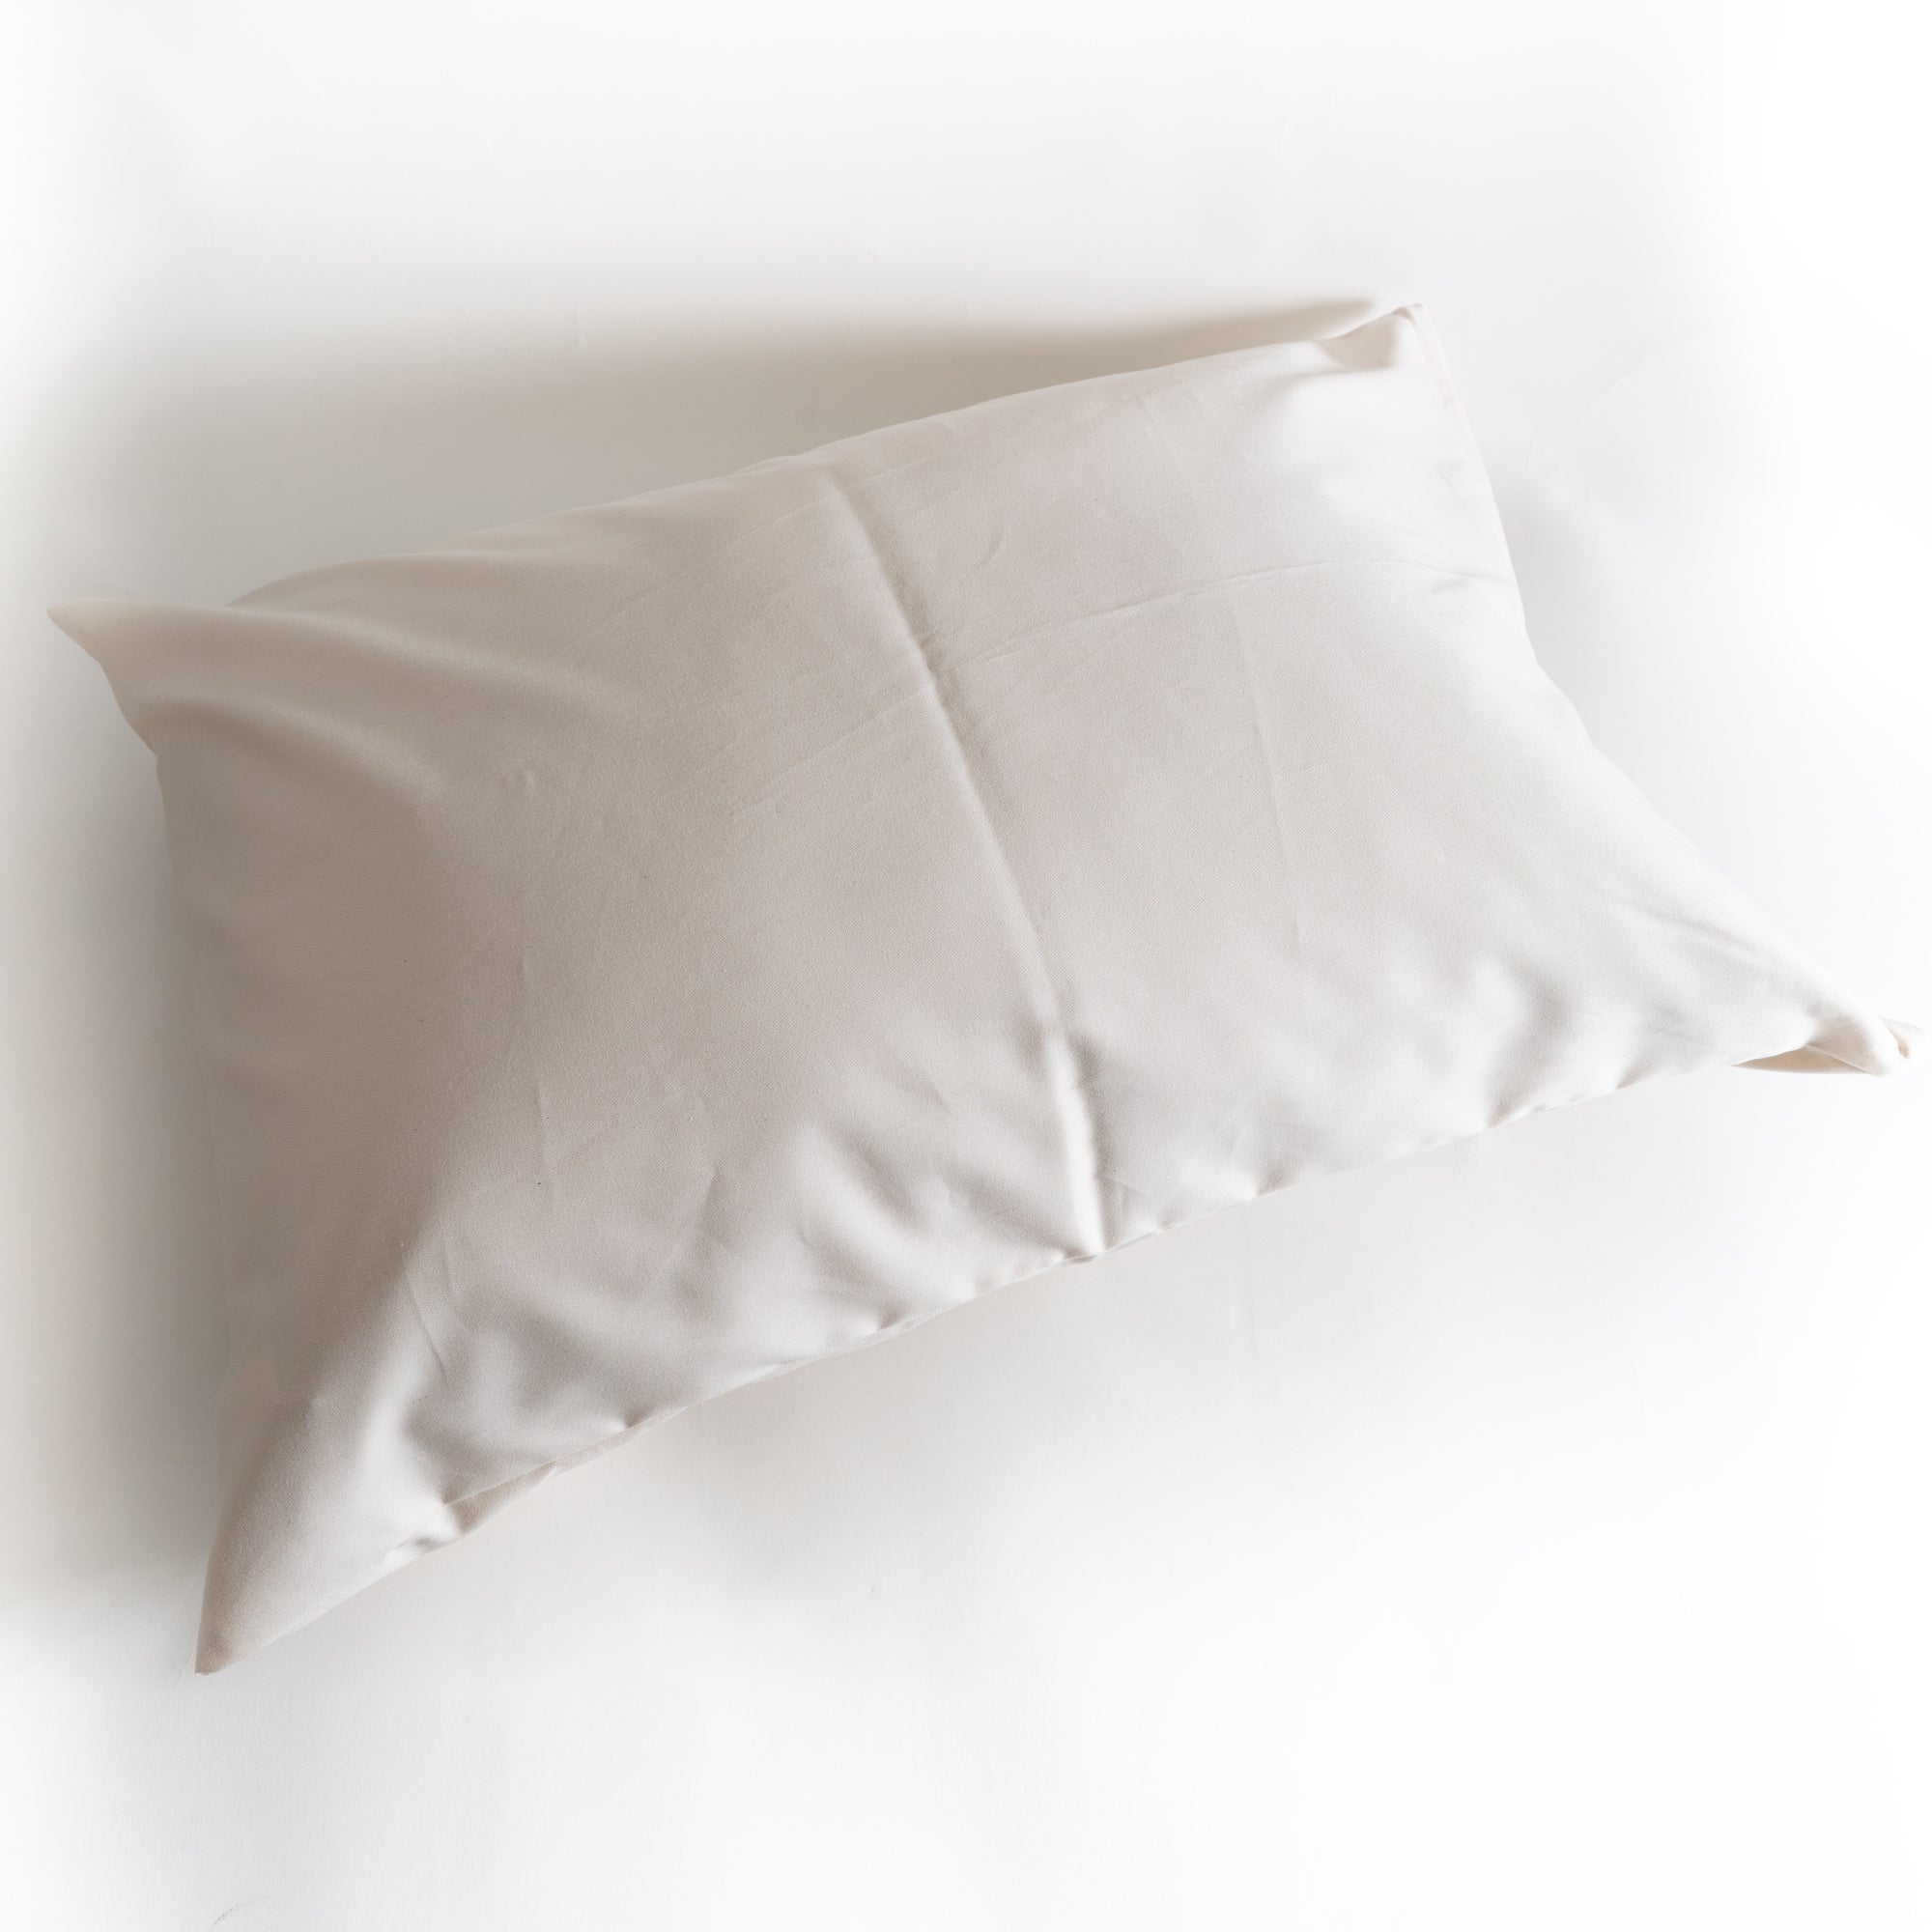 Pillow Protector for Bed Pillows